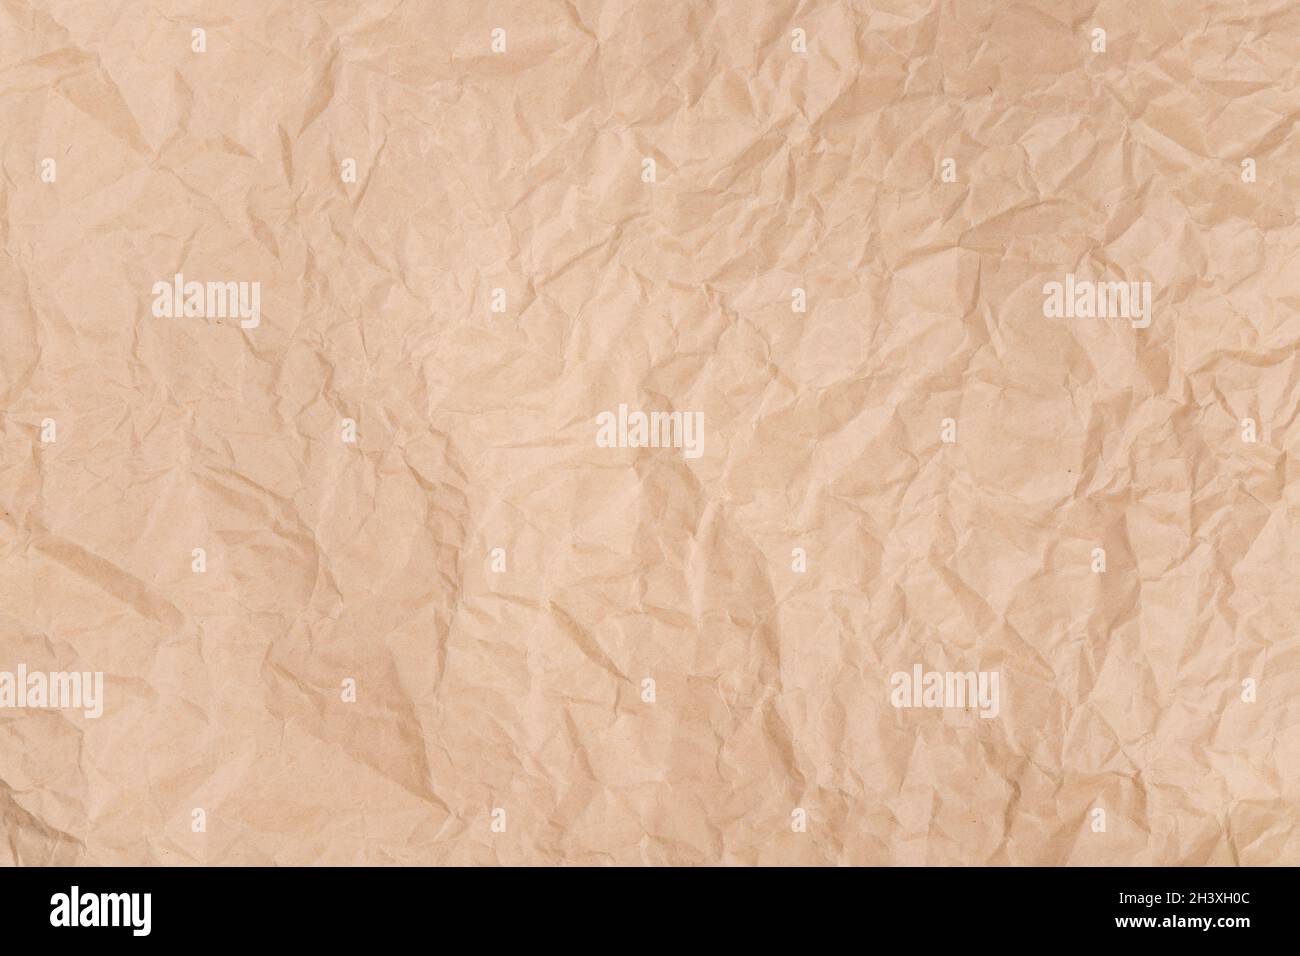 Rumpled brown paper texture Stock Photo